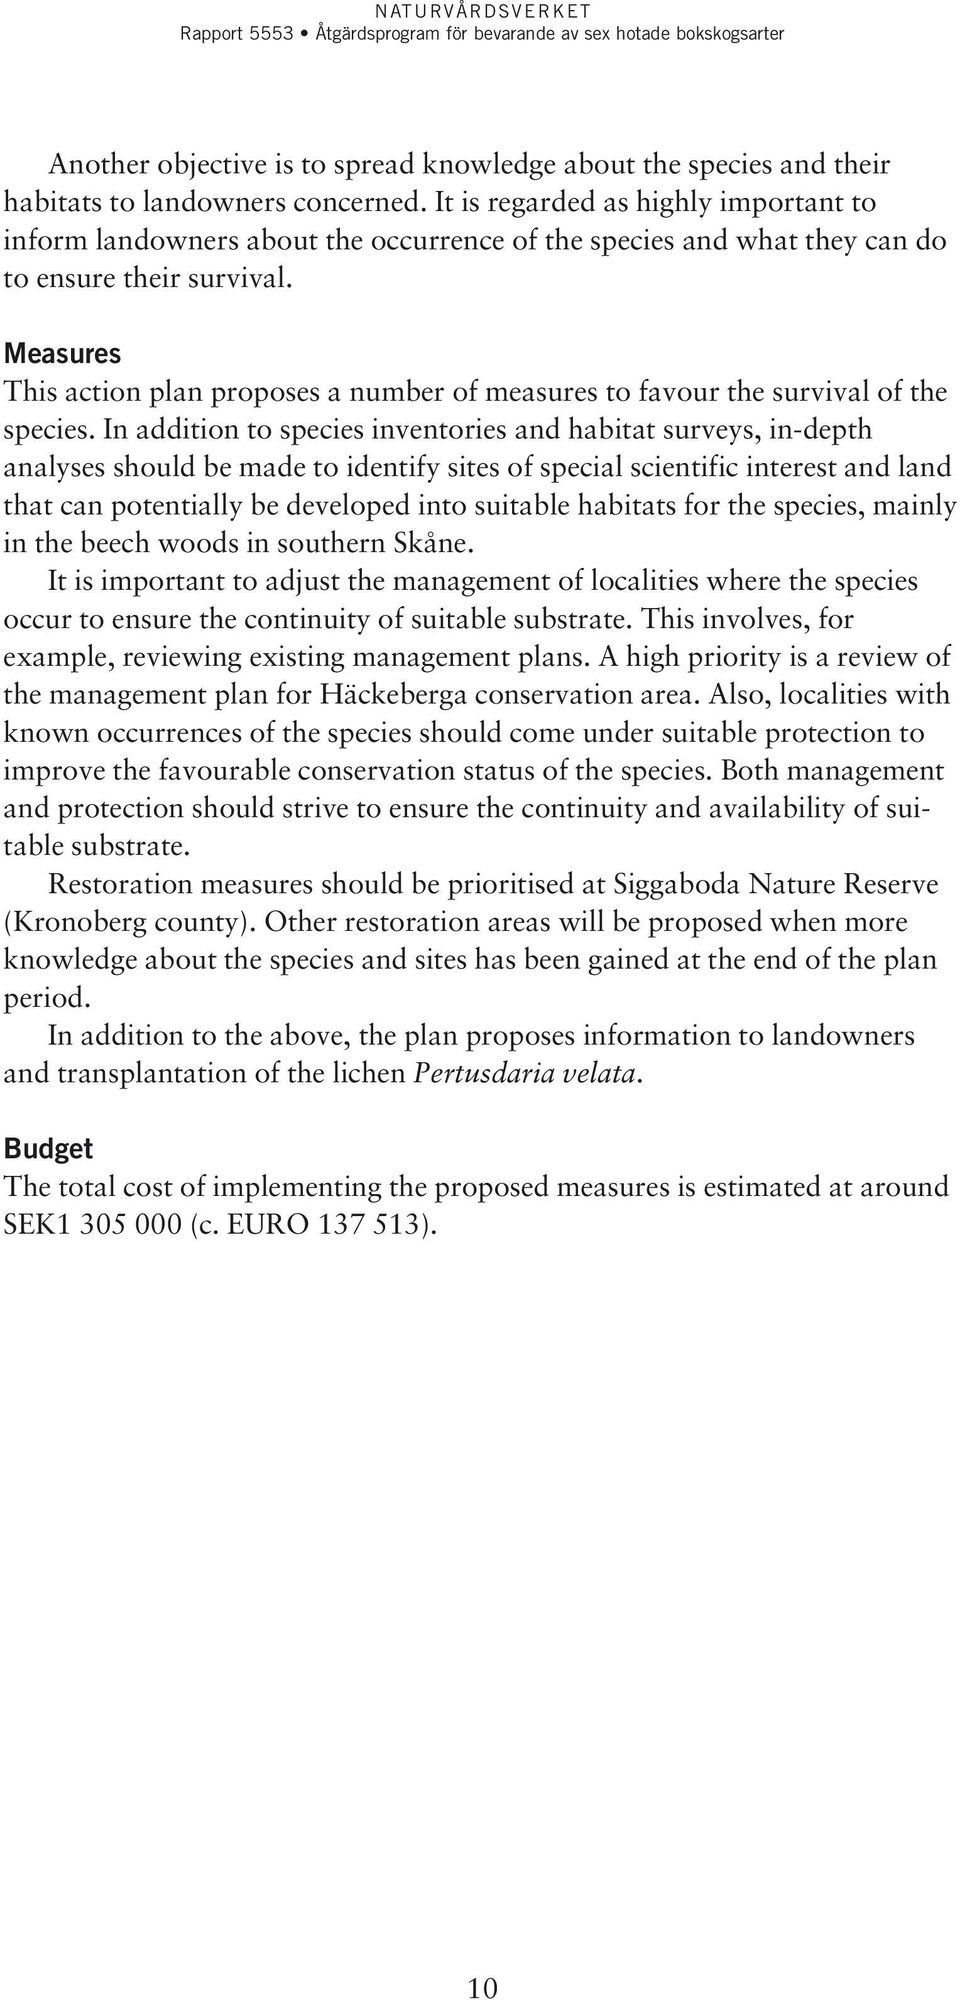 Measures This action plan proposes a number of measures to favour the survival of the species.